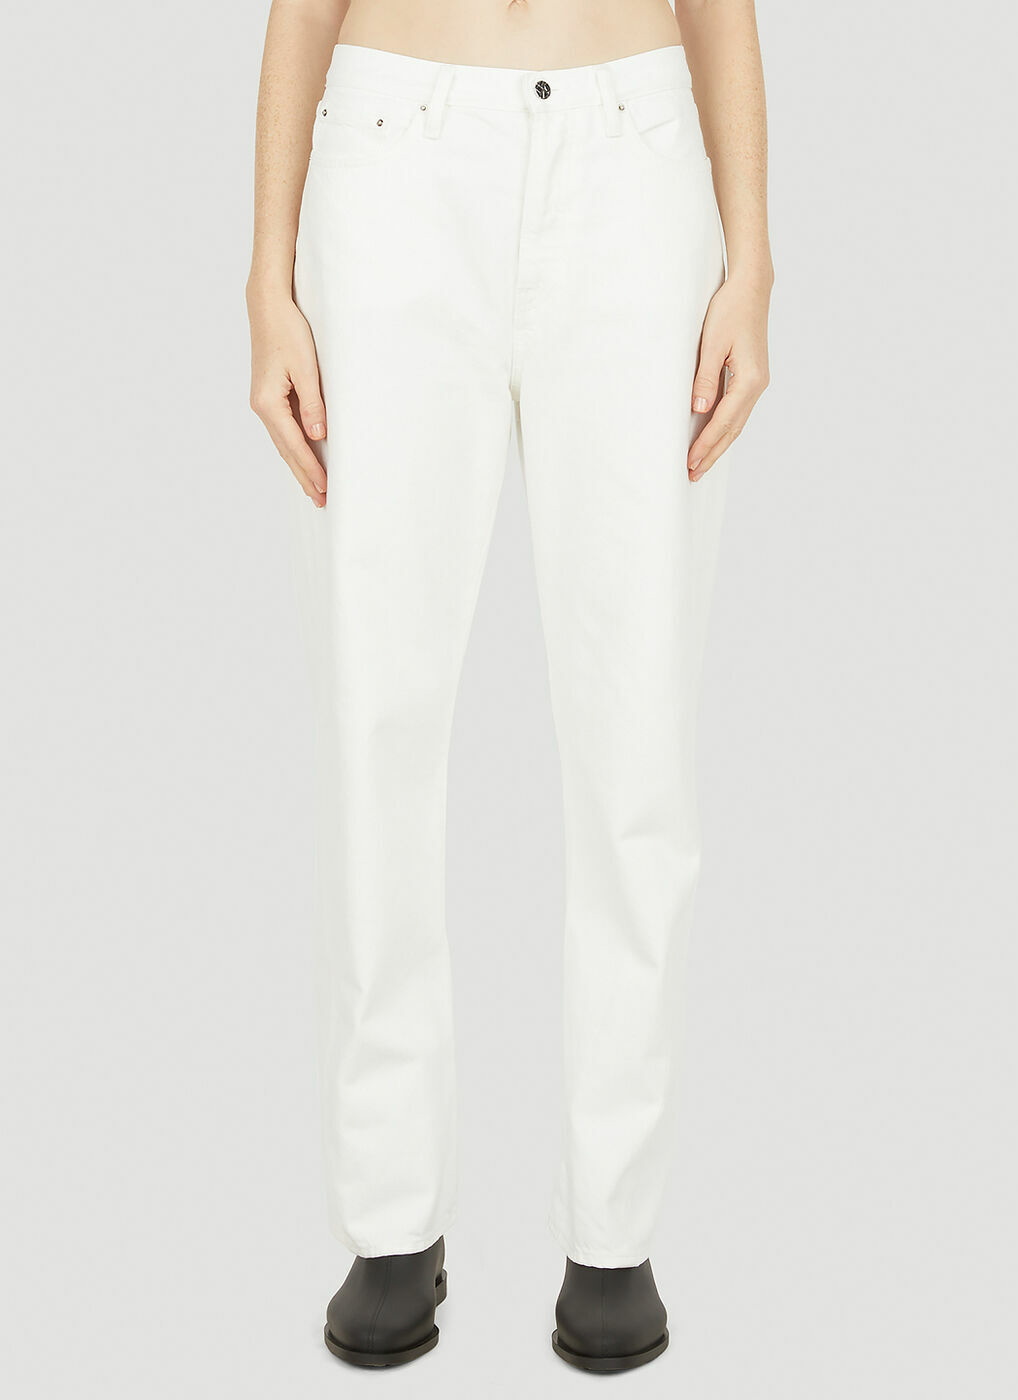 Twisted Seam Jeans in White Toteme